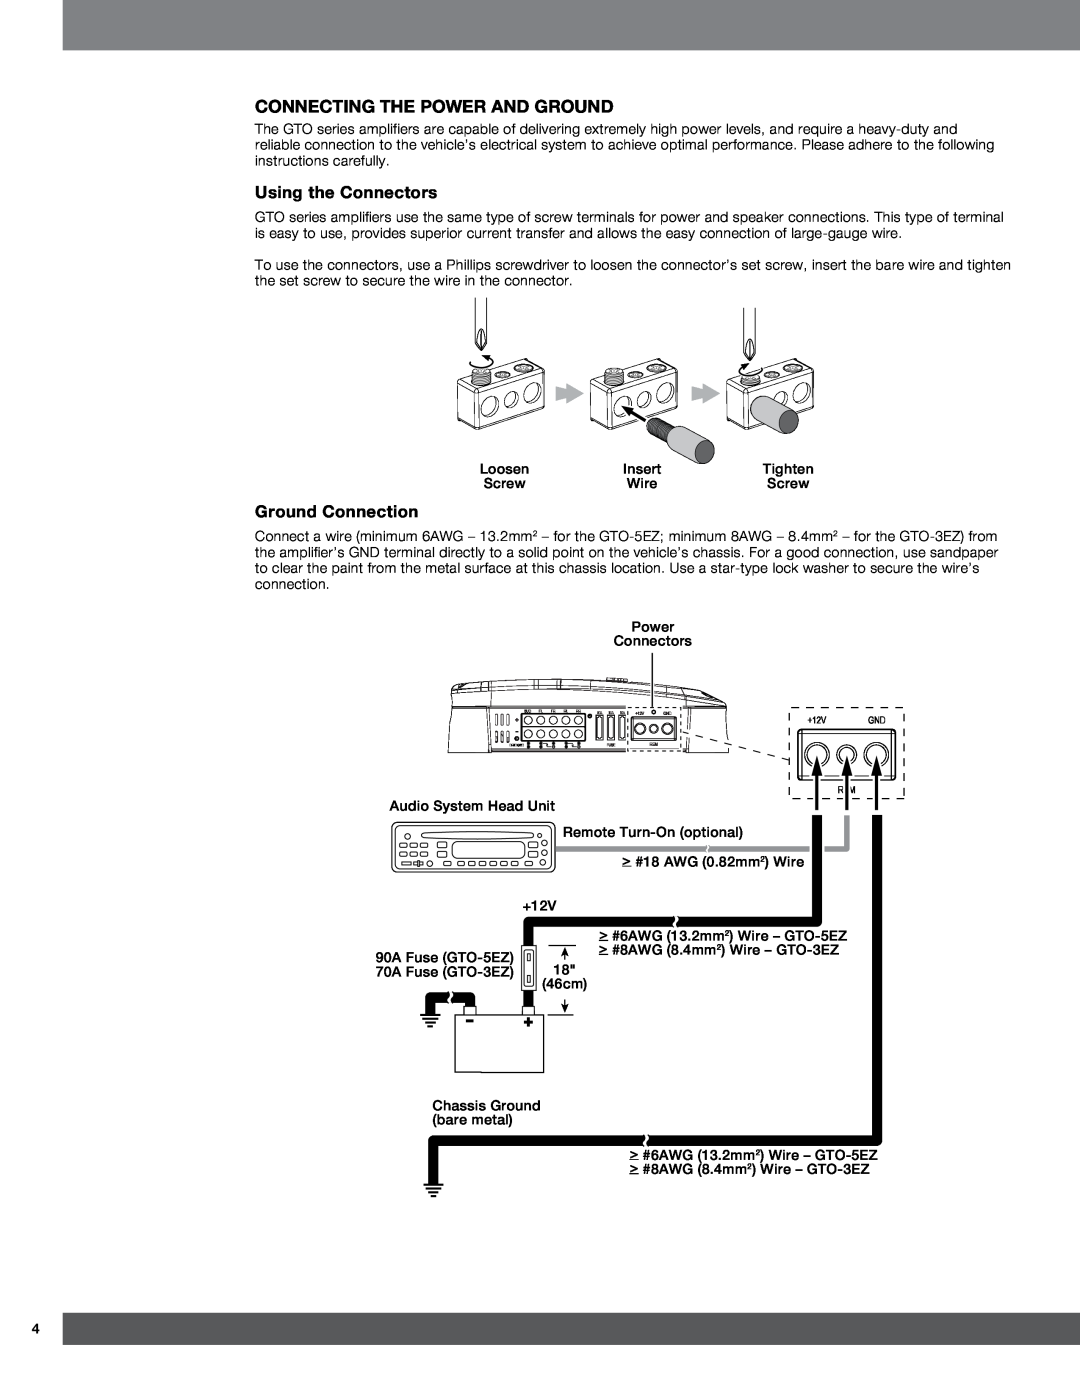 Harman GTO-3EZ, GTO-5EZ owner manual Connecting the Power and Ground, Using the Connectors, Ground Connection 